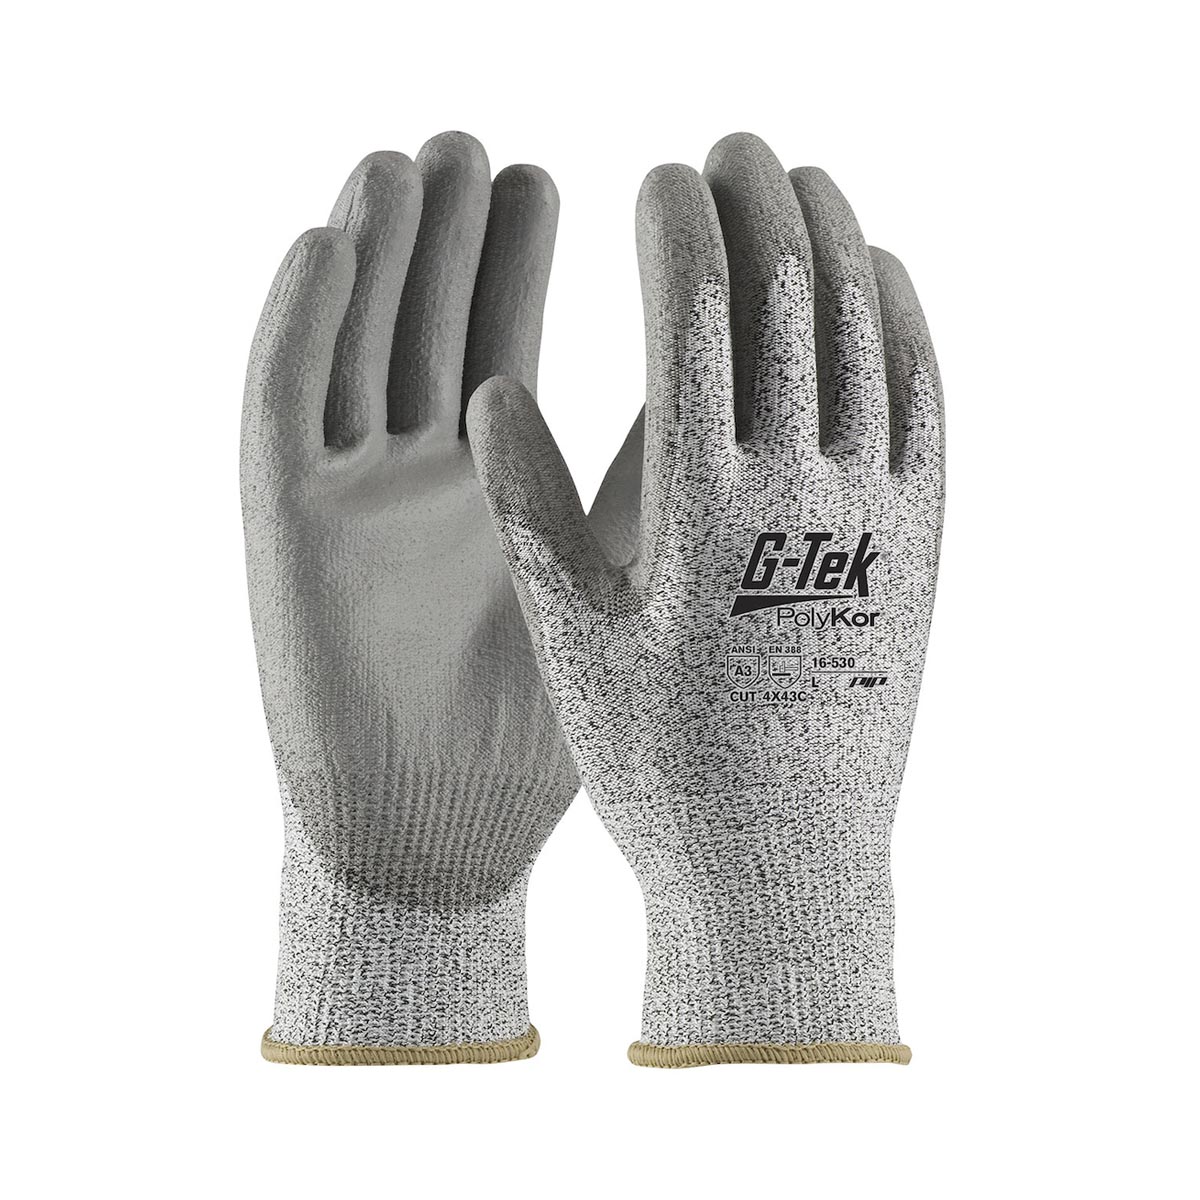 Airgas - PIP16-351/XXL - Protective Industrial Products 2X G-Tek® PolyKor®  21 Gauge Cut Resistant Gloves With Nitrile Coating And Touchscreen  Compatability